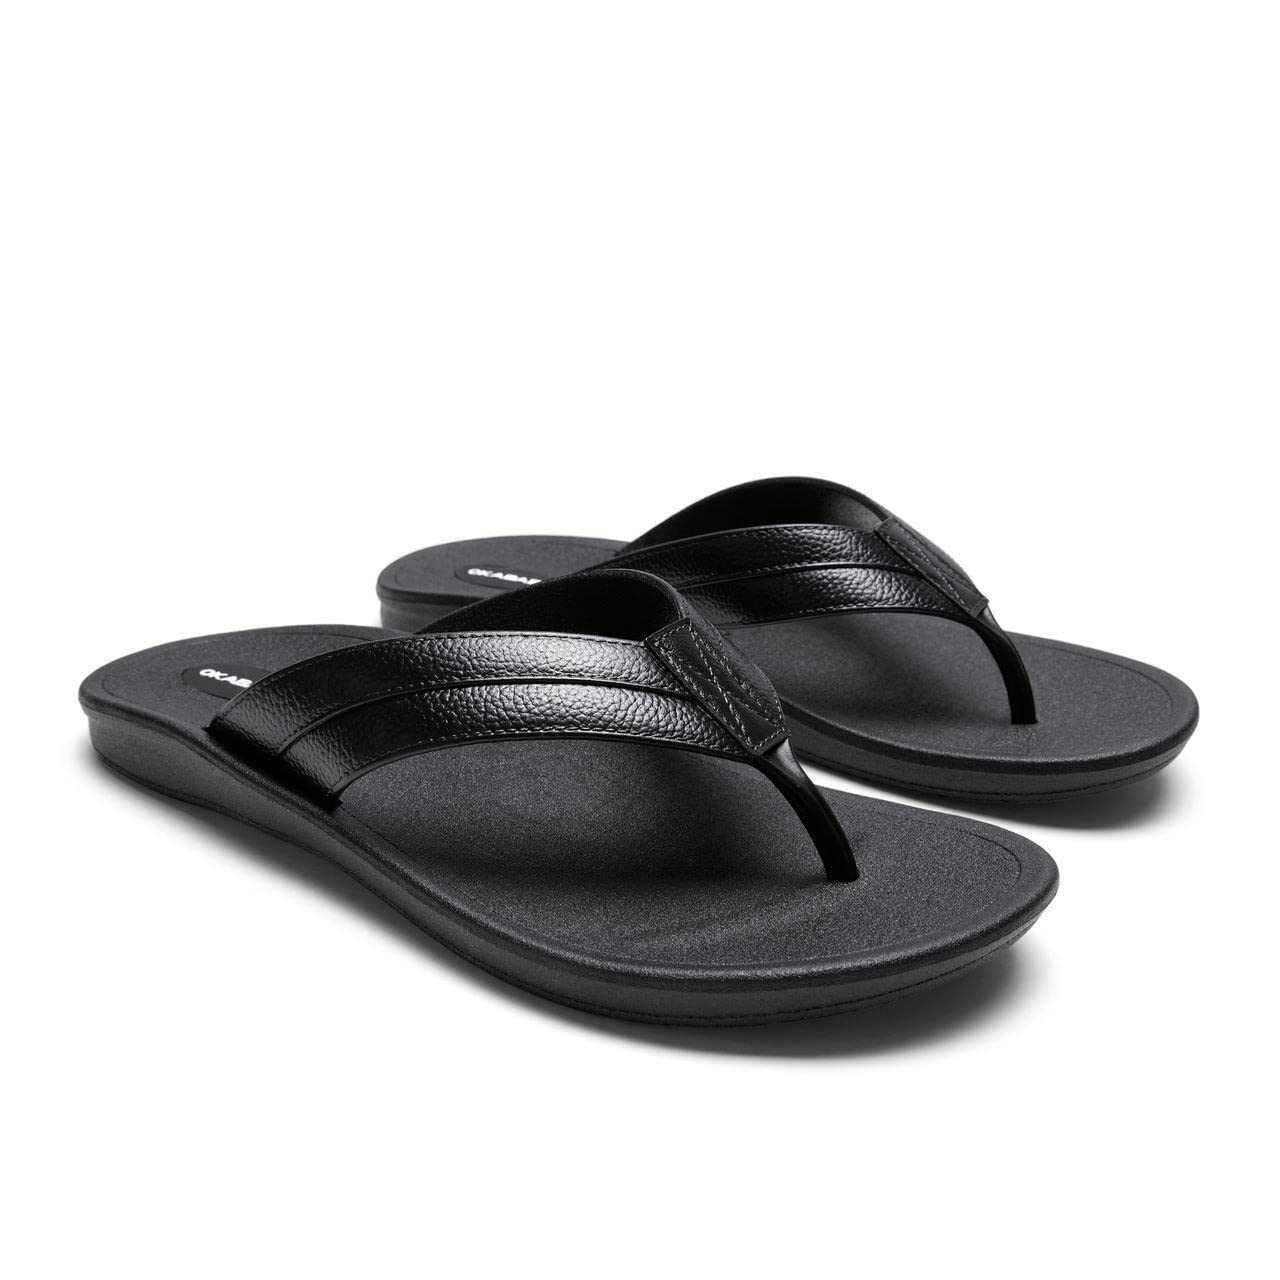 OKABASHI Men's Voyager Flip Flop (Black, 10) | Sculpted Footbed w/Nonslip Grip | Slip Resistant & Waterproof | Sustainably Made in the USA